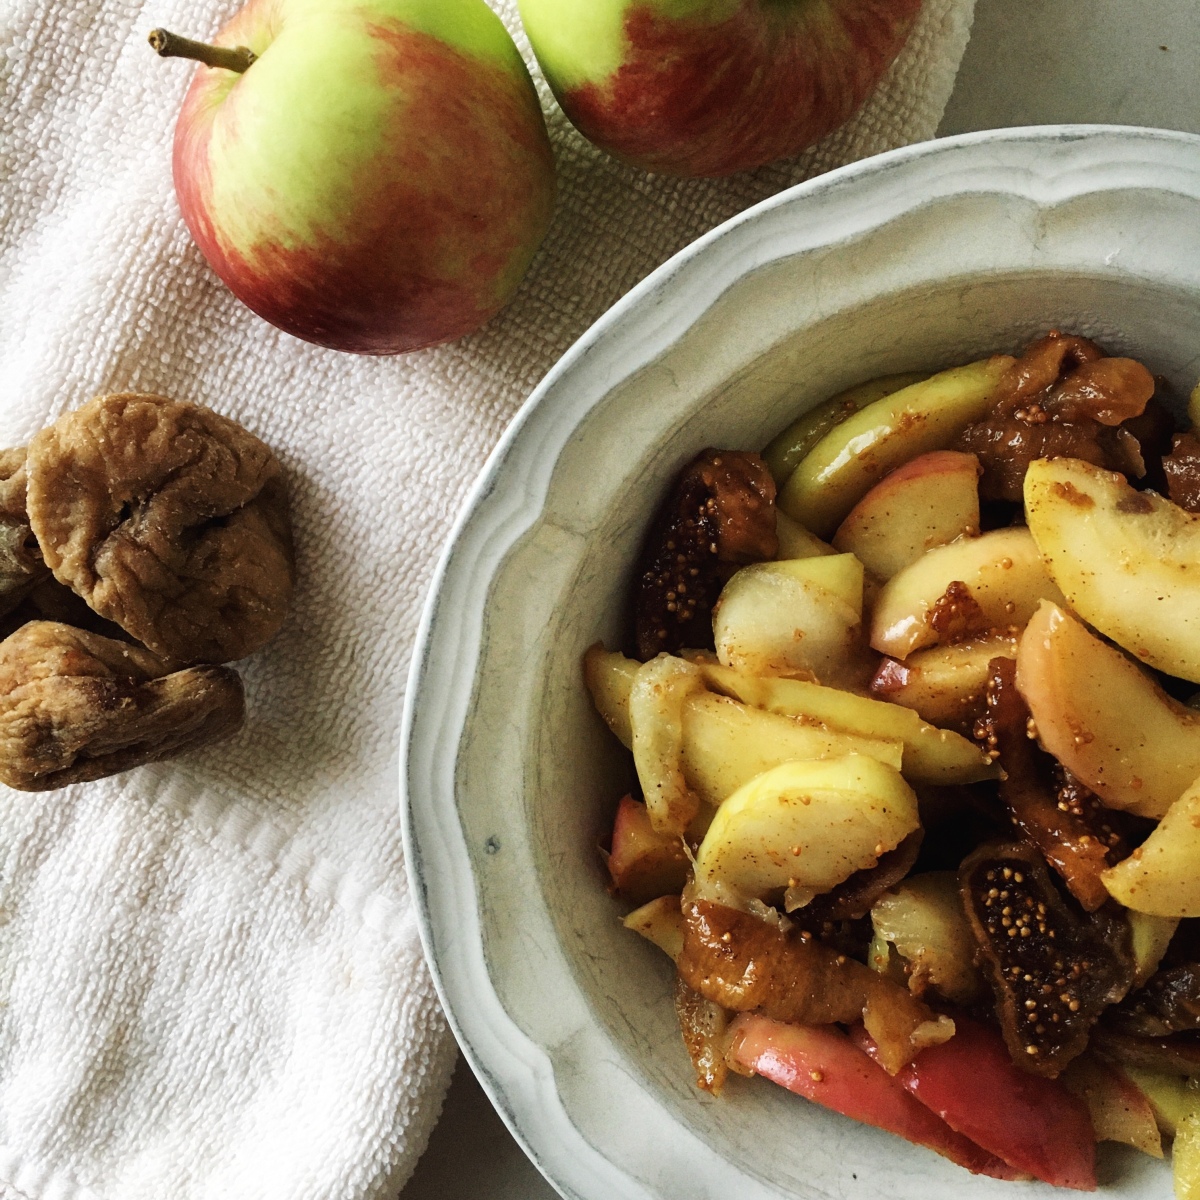 Sautéed Figs and Apples